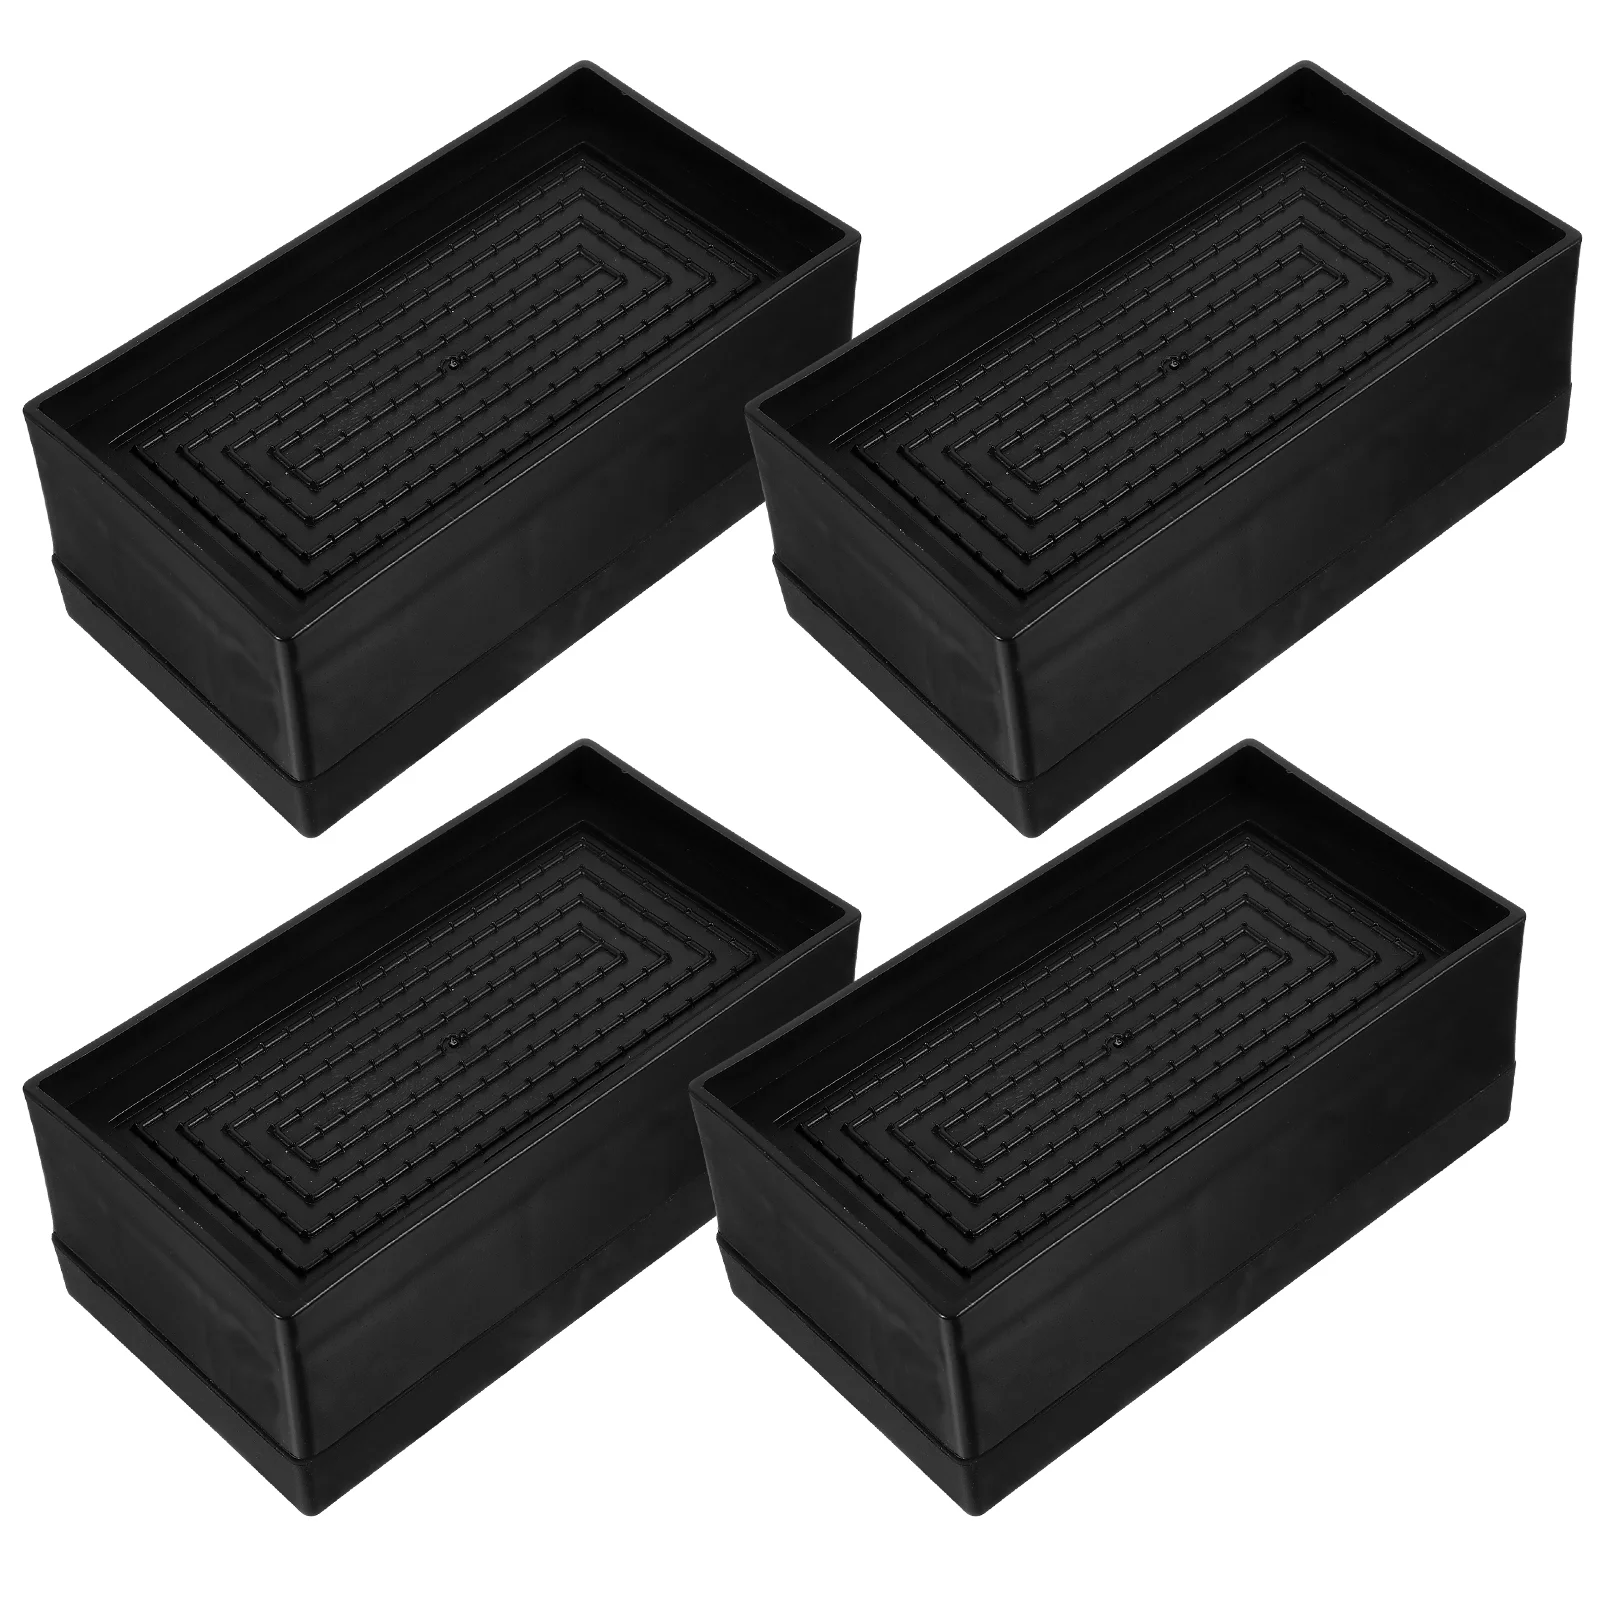 

4 Pcs Furniture Heightening Pads Stability Bed Risers Cabinet Household Supplies Sofa Tpu Lifters Embellishments